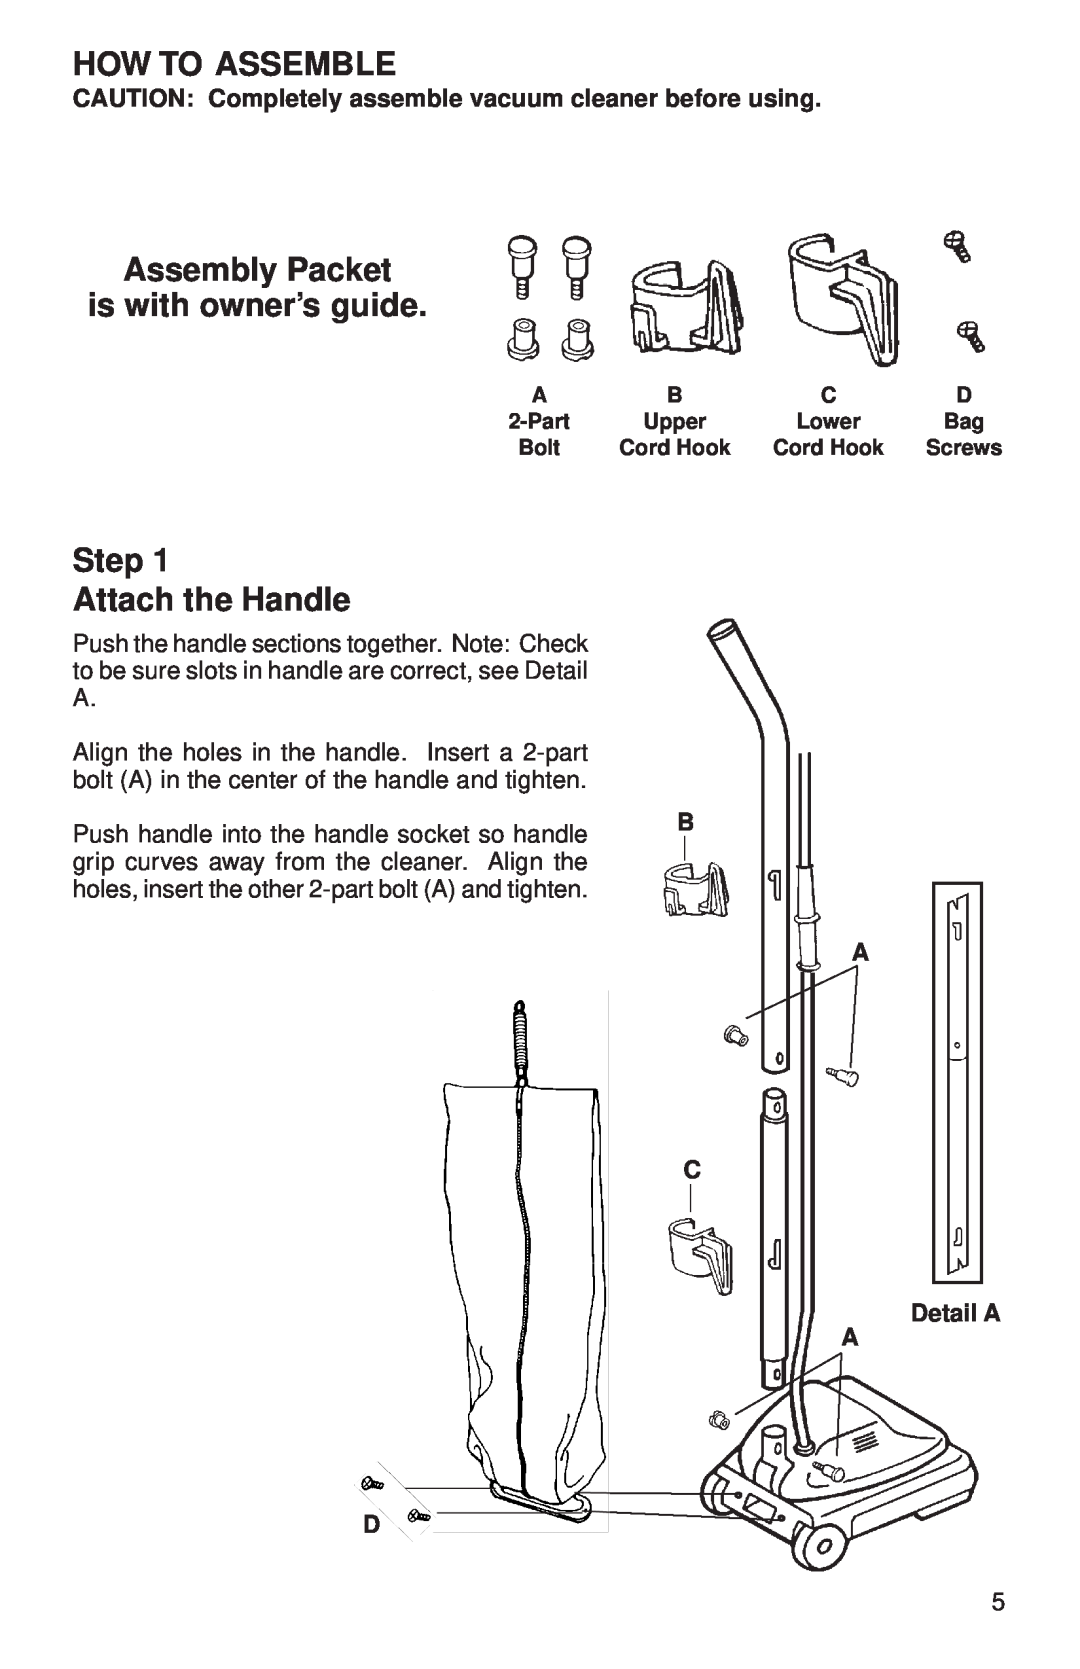 Sanitaire 600 Series How To Assemble, Assembly Packet is with owner’s guide, Step Attach the Handle, B A C Detail A A 